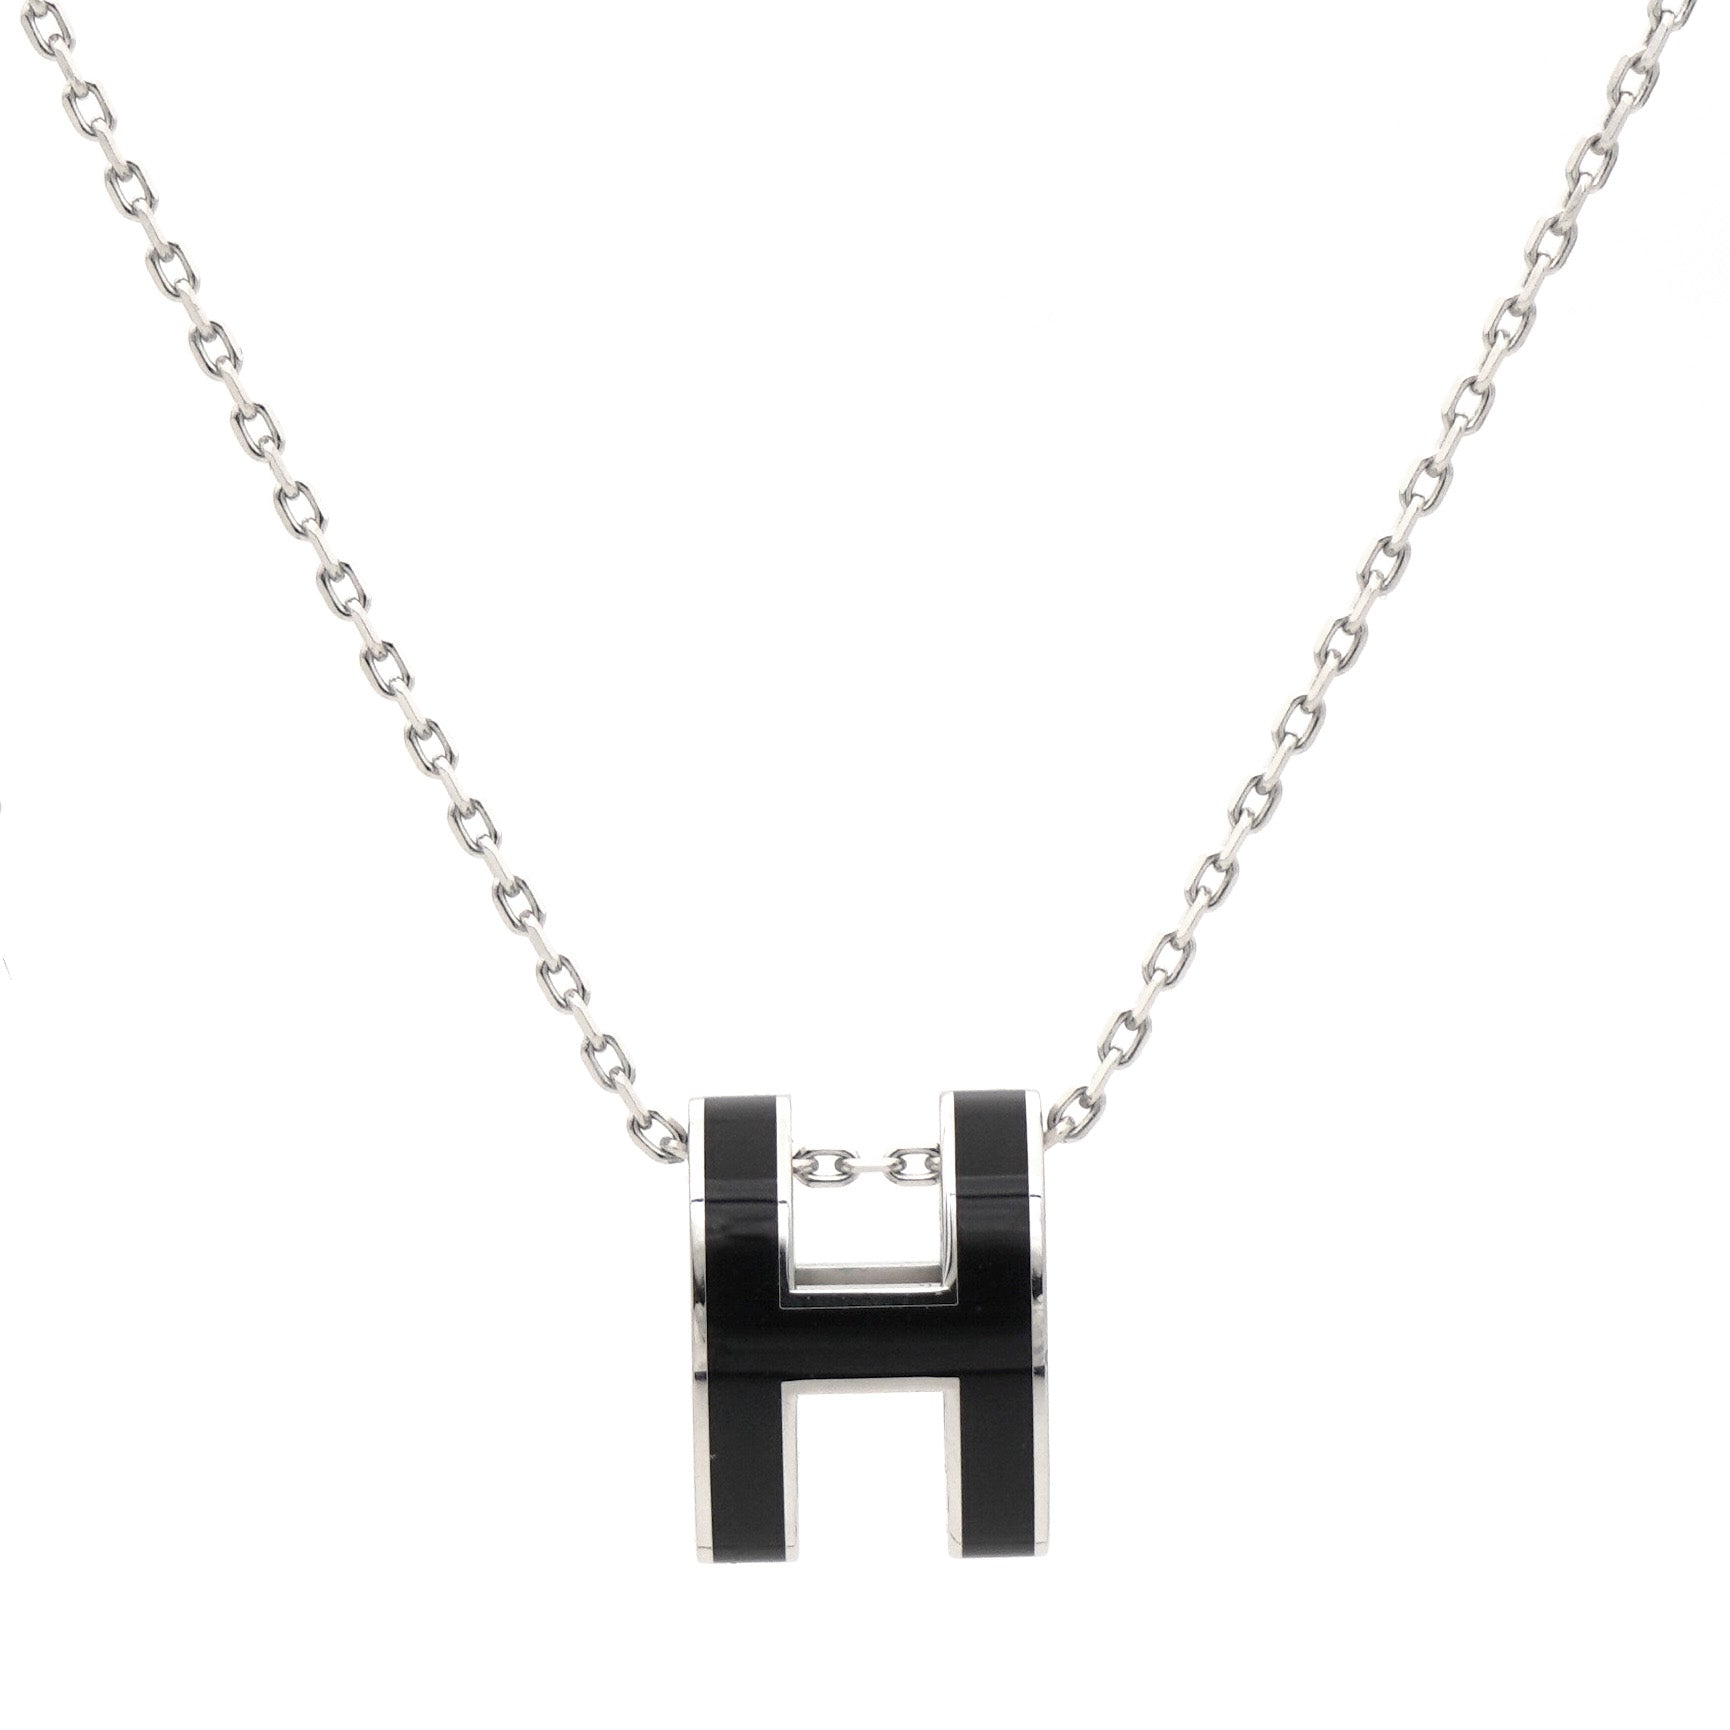 H Black Lacquer Silver Plated Pendant Necklace